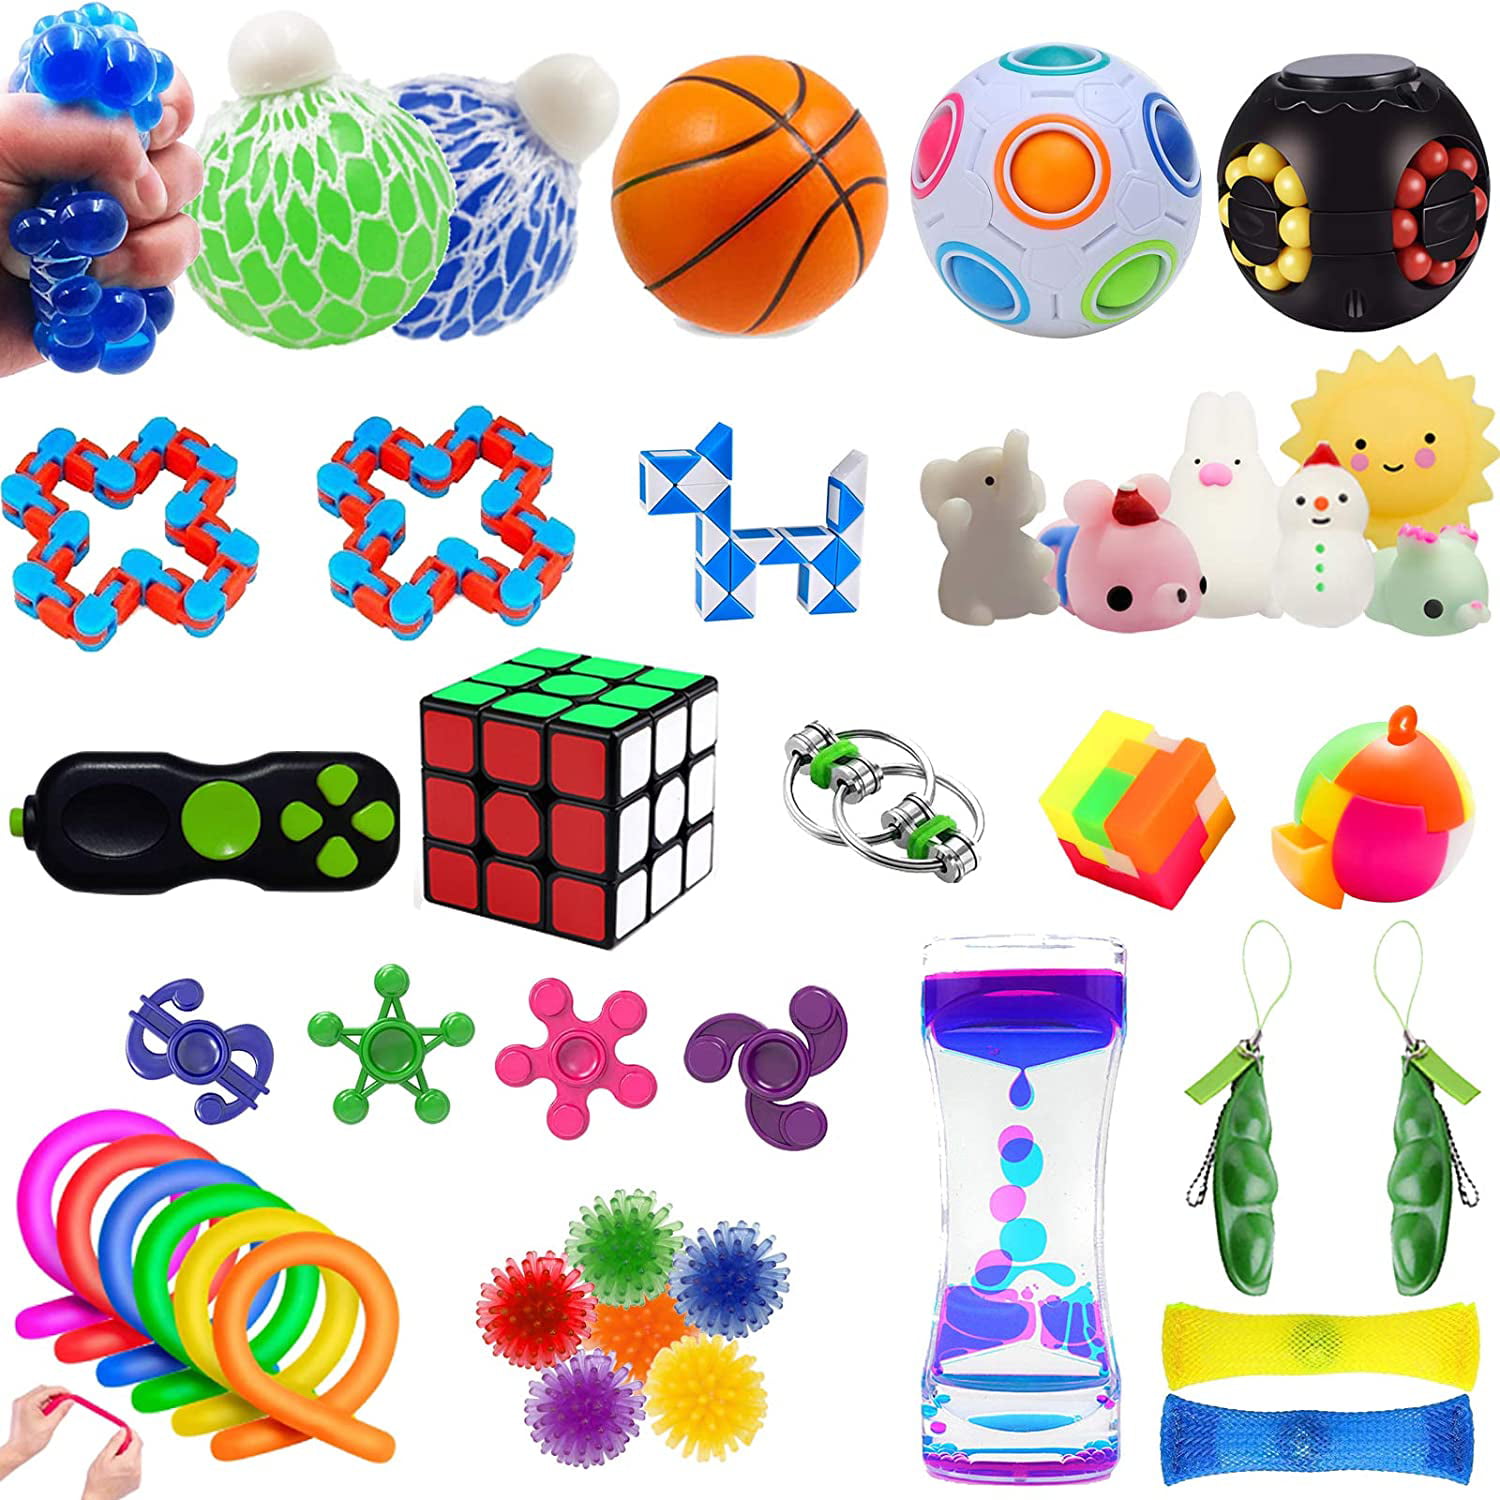 MMTX Pop up Bubble Fidget Toy Sensory Fidget Toys for Kids & Adults Bubble Popper Fidget Toy Stress Anxiety Relief Toys for ADHD Autism Special Needs